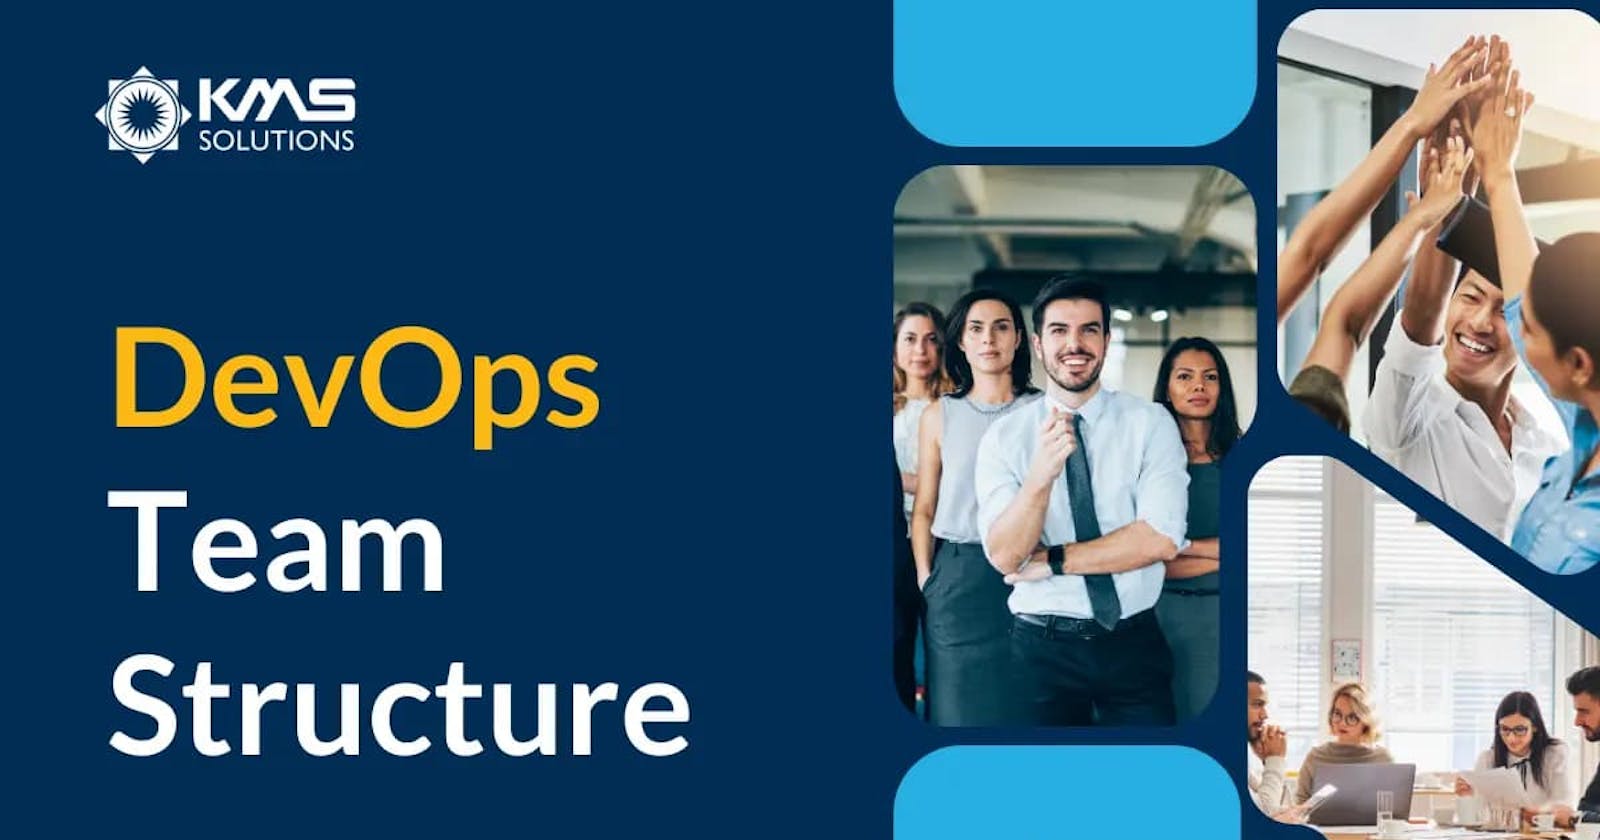 9 DevOps Team Structures to Achieve Continuous Delivery